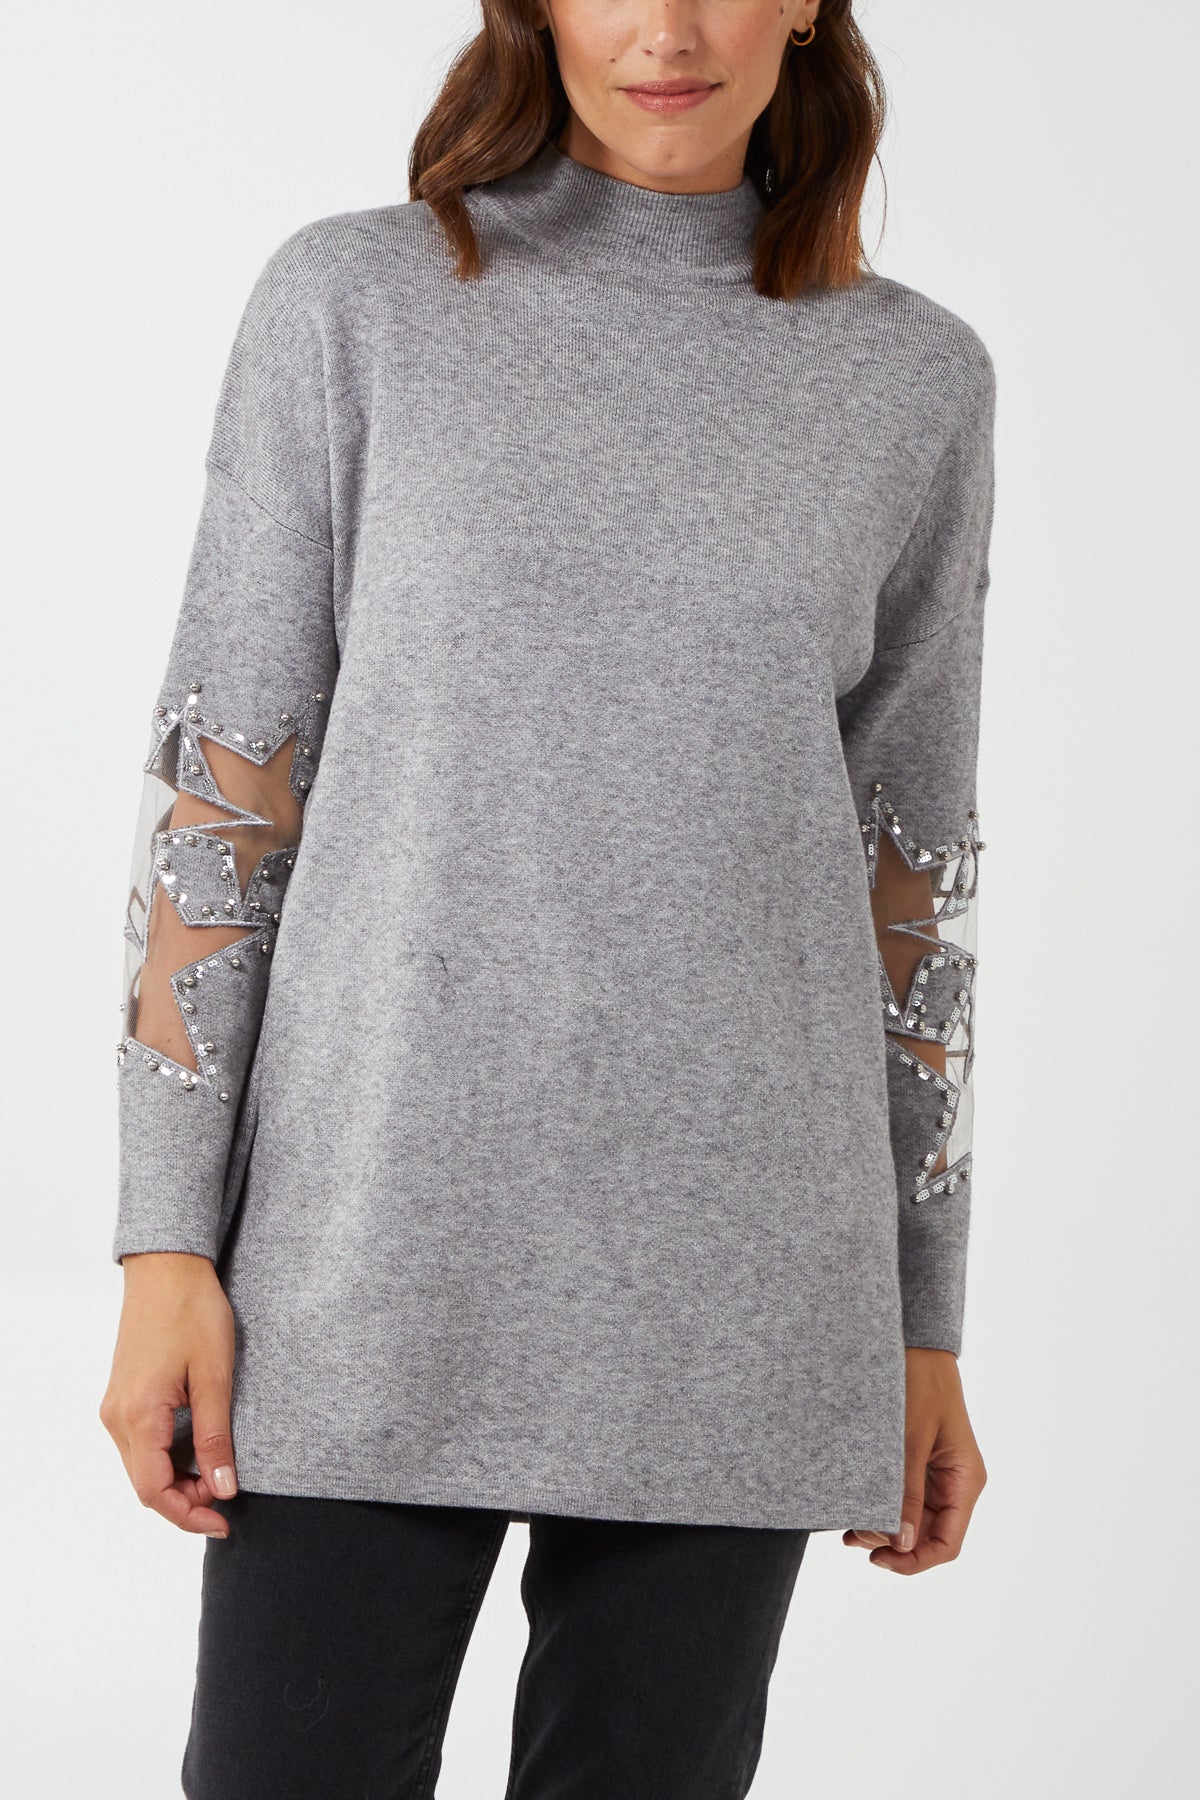 High Neck Jumper With Star Mesh Sleeves